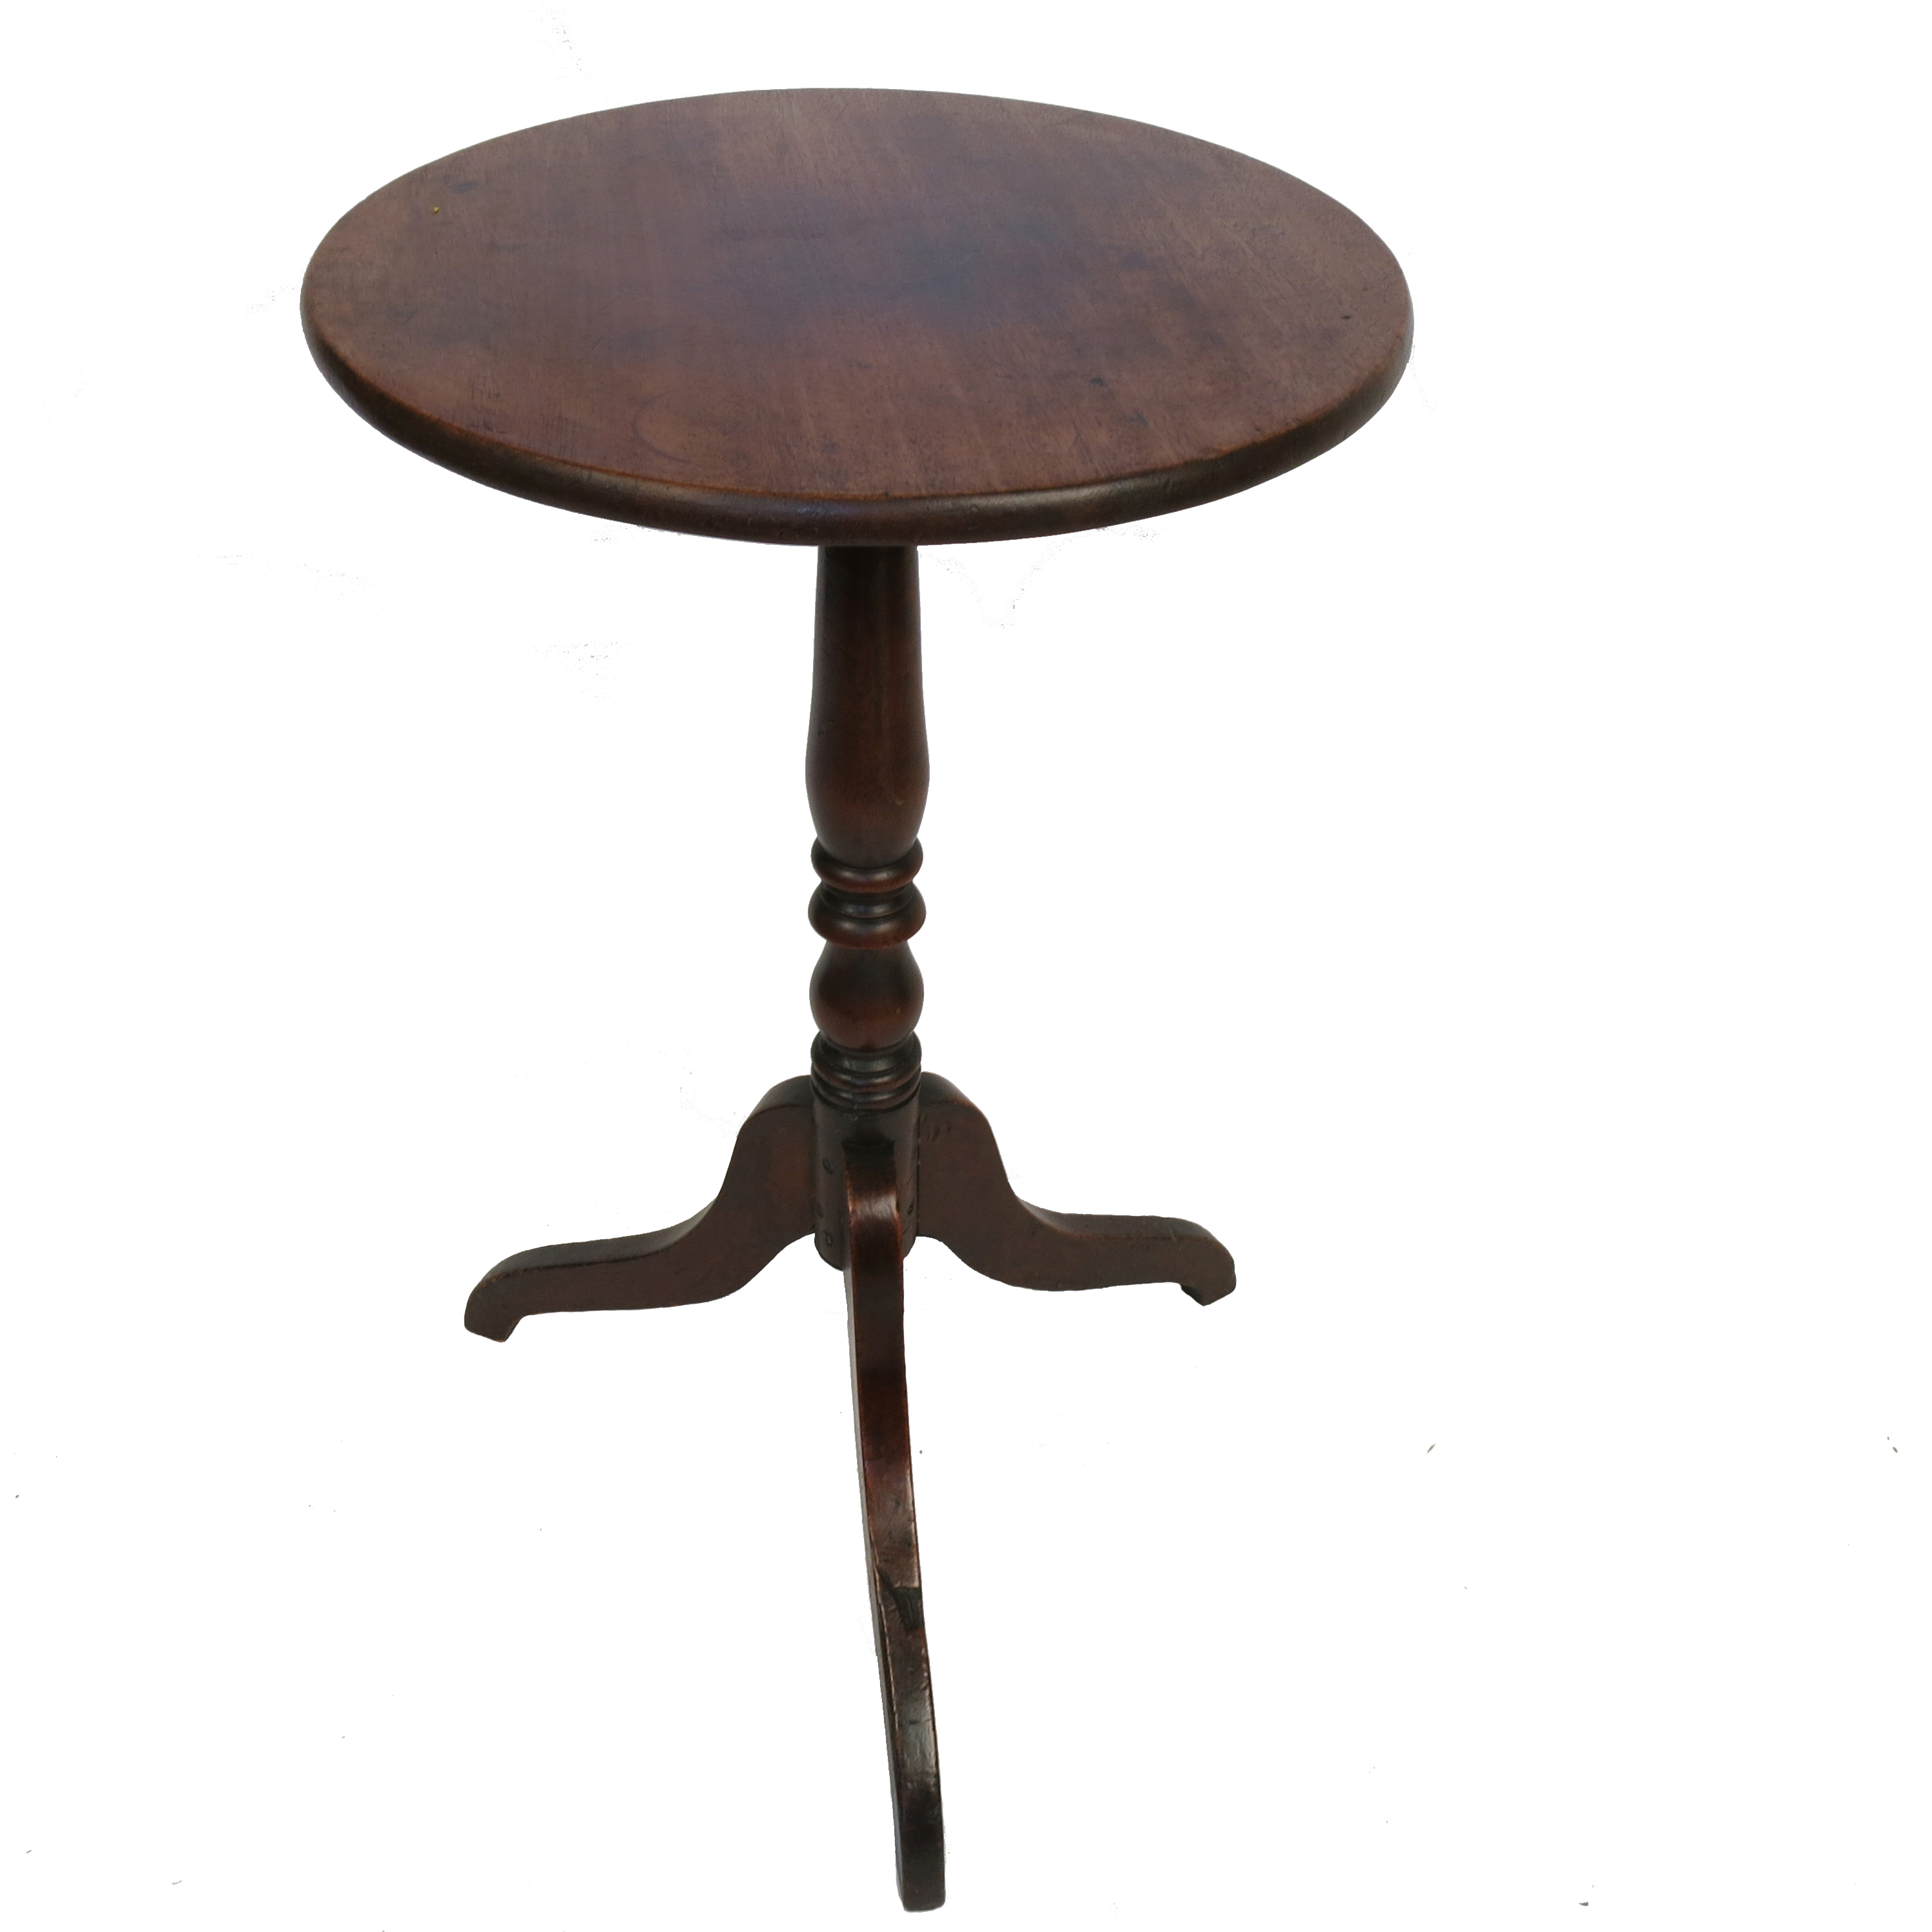 A 19th century mahogany circular occasional table, raised on a turned column with tripod base,